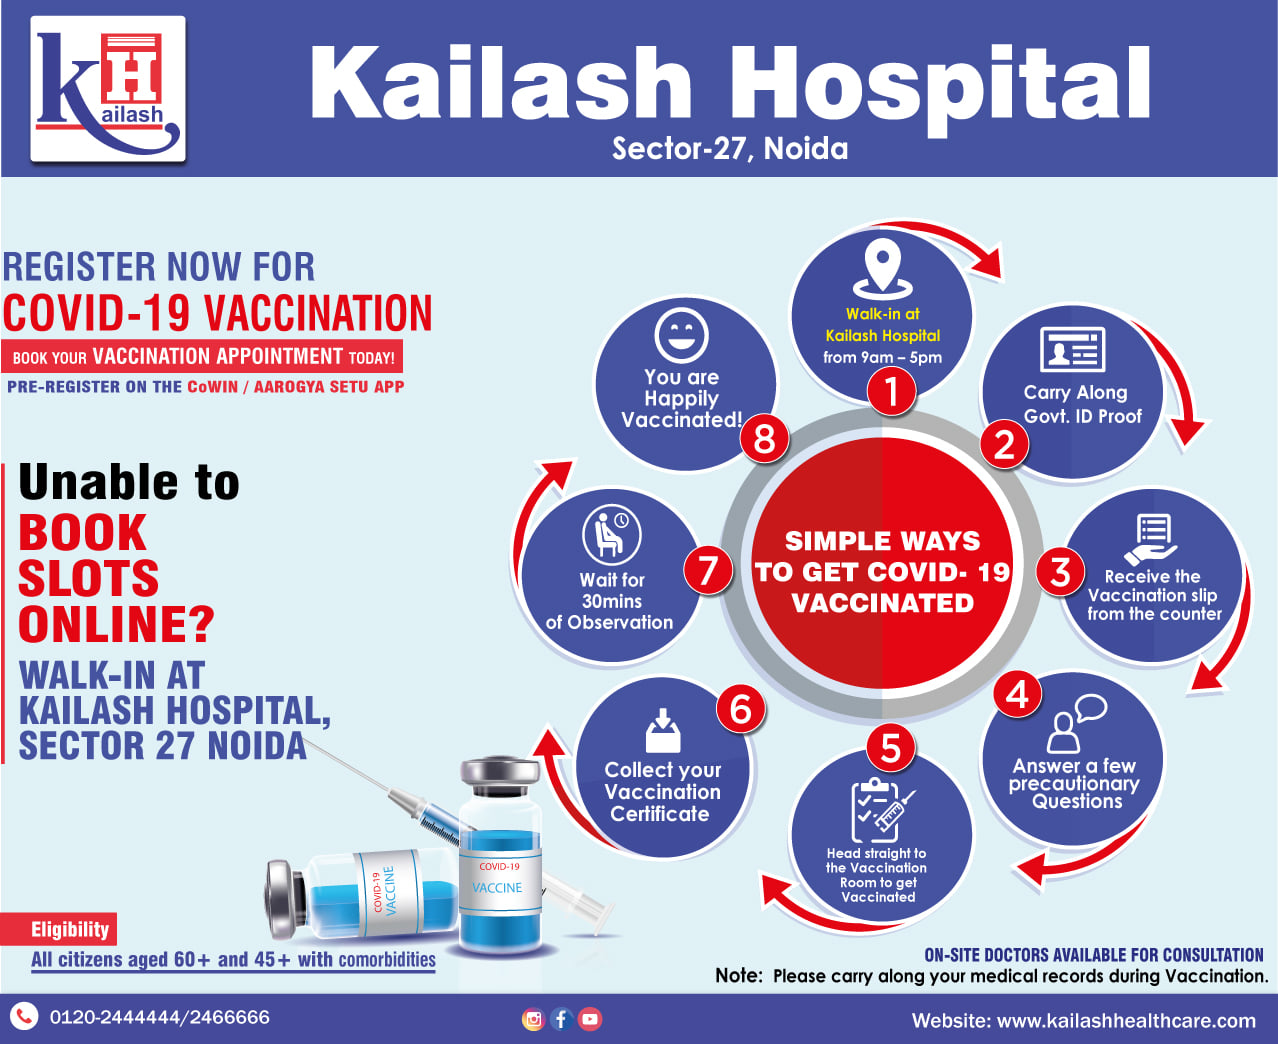 Unable to Book Online Slots for COVID19 Vaccination? Walk-in to Kailash Hospital Sector 27 Noida.